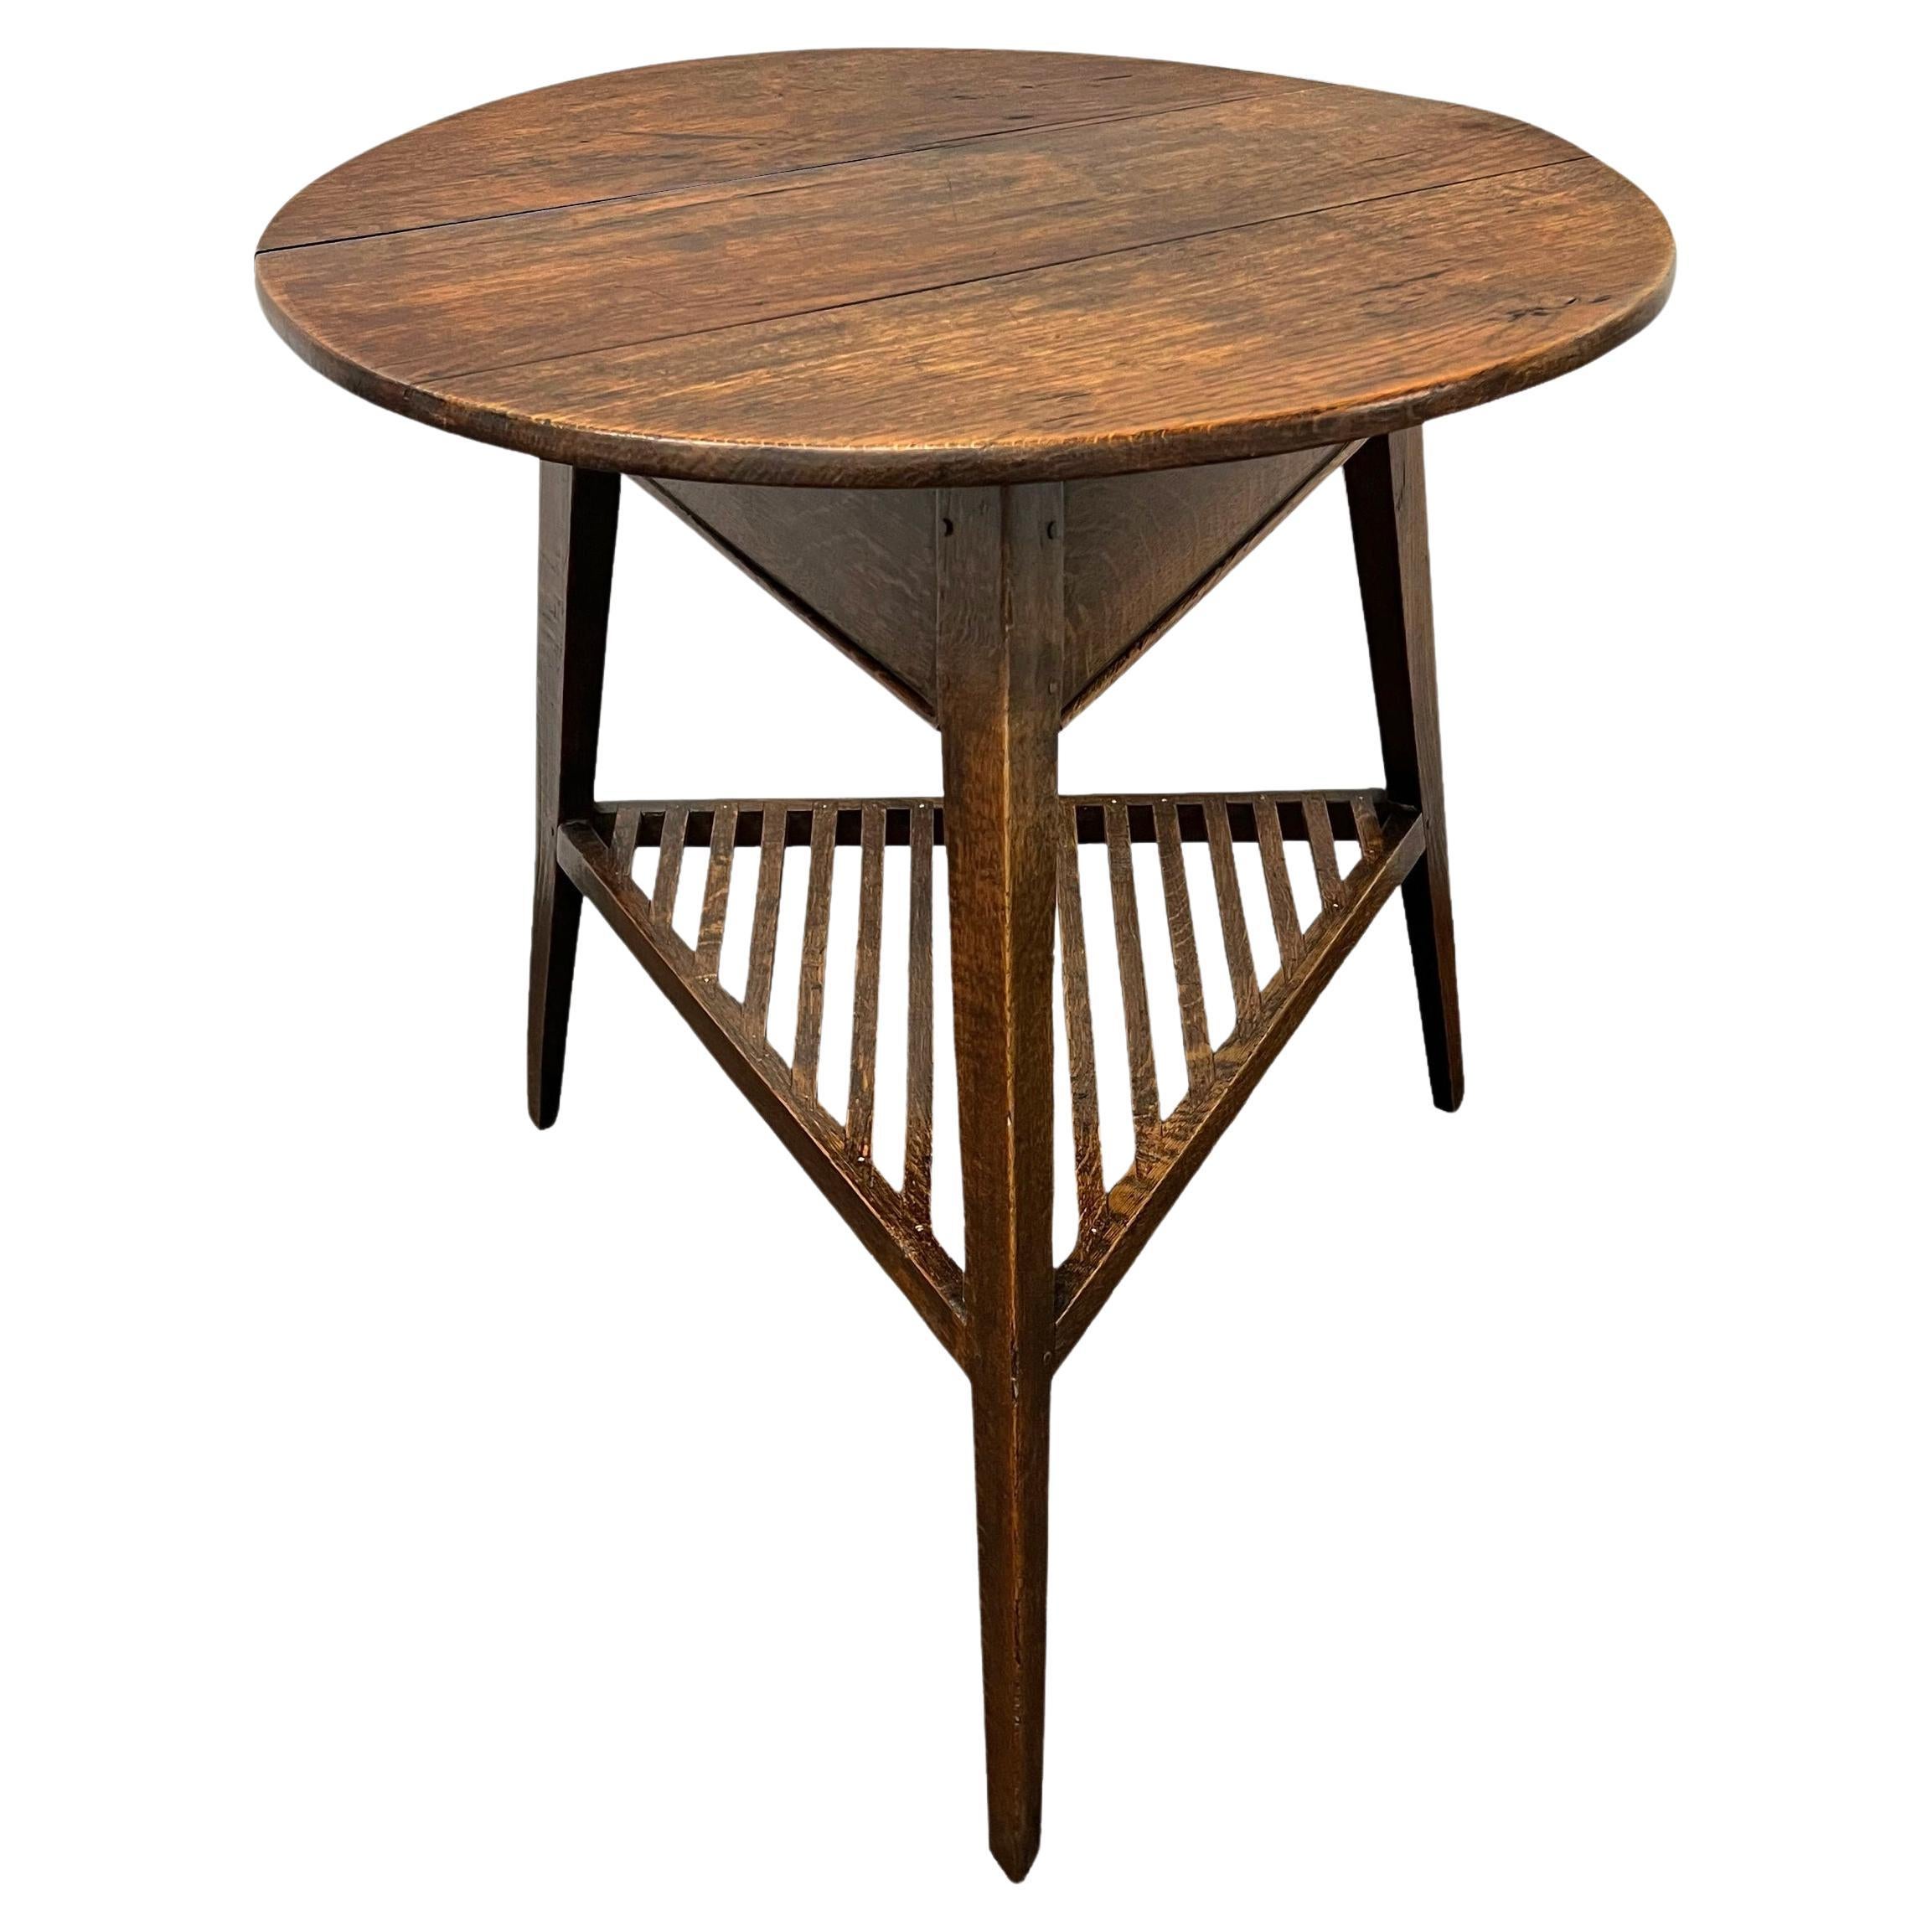 19th Century English Cricket Table with Lattice Shelf For Sale